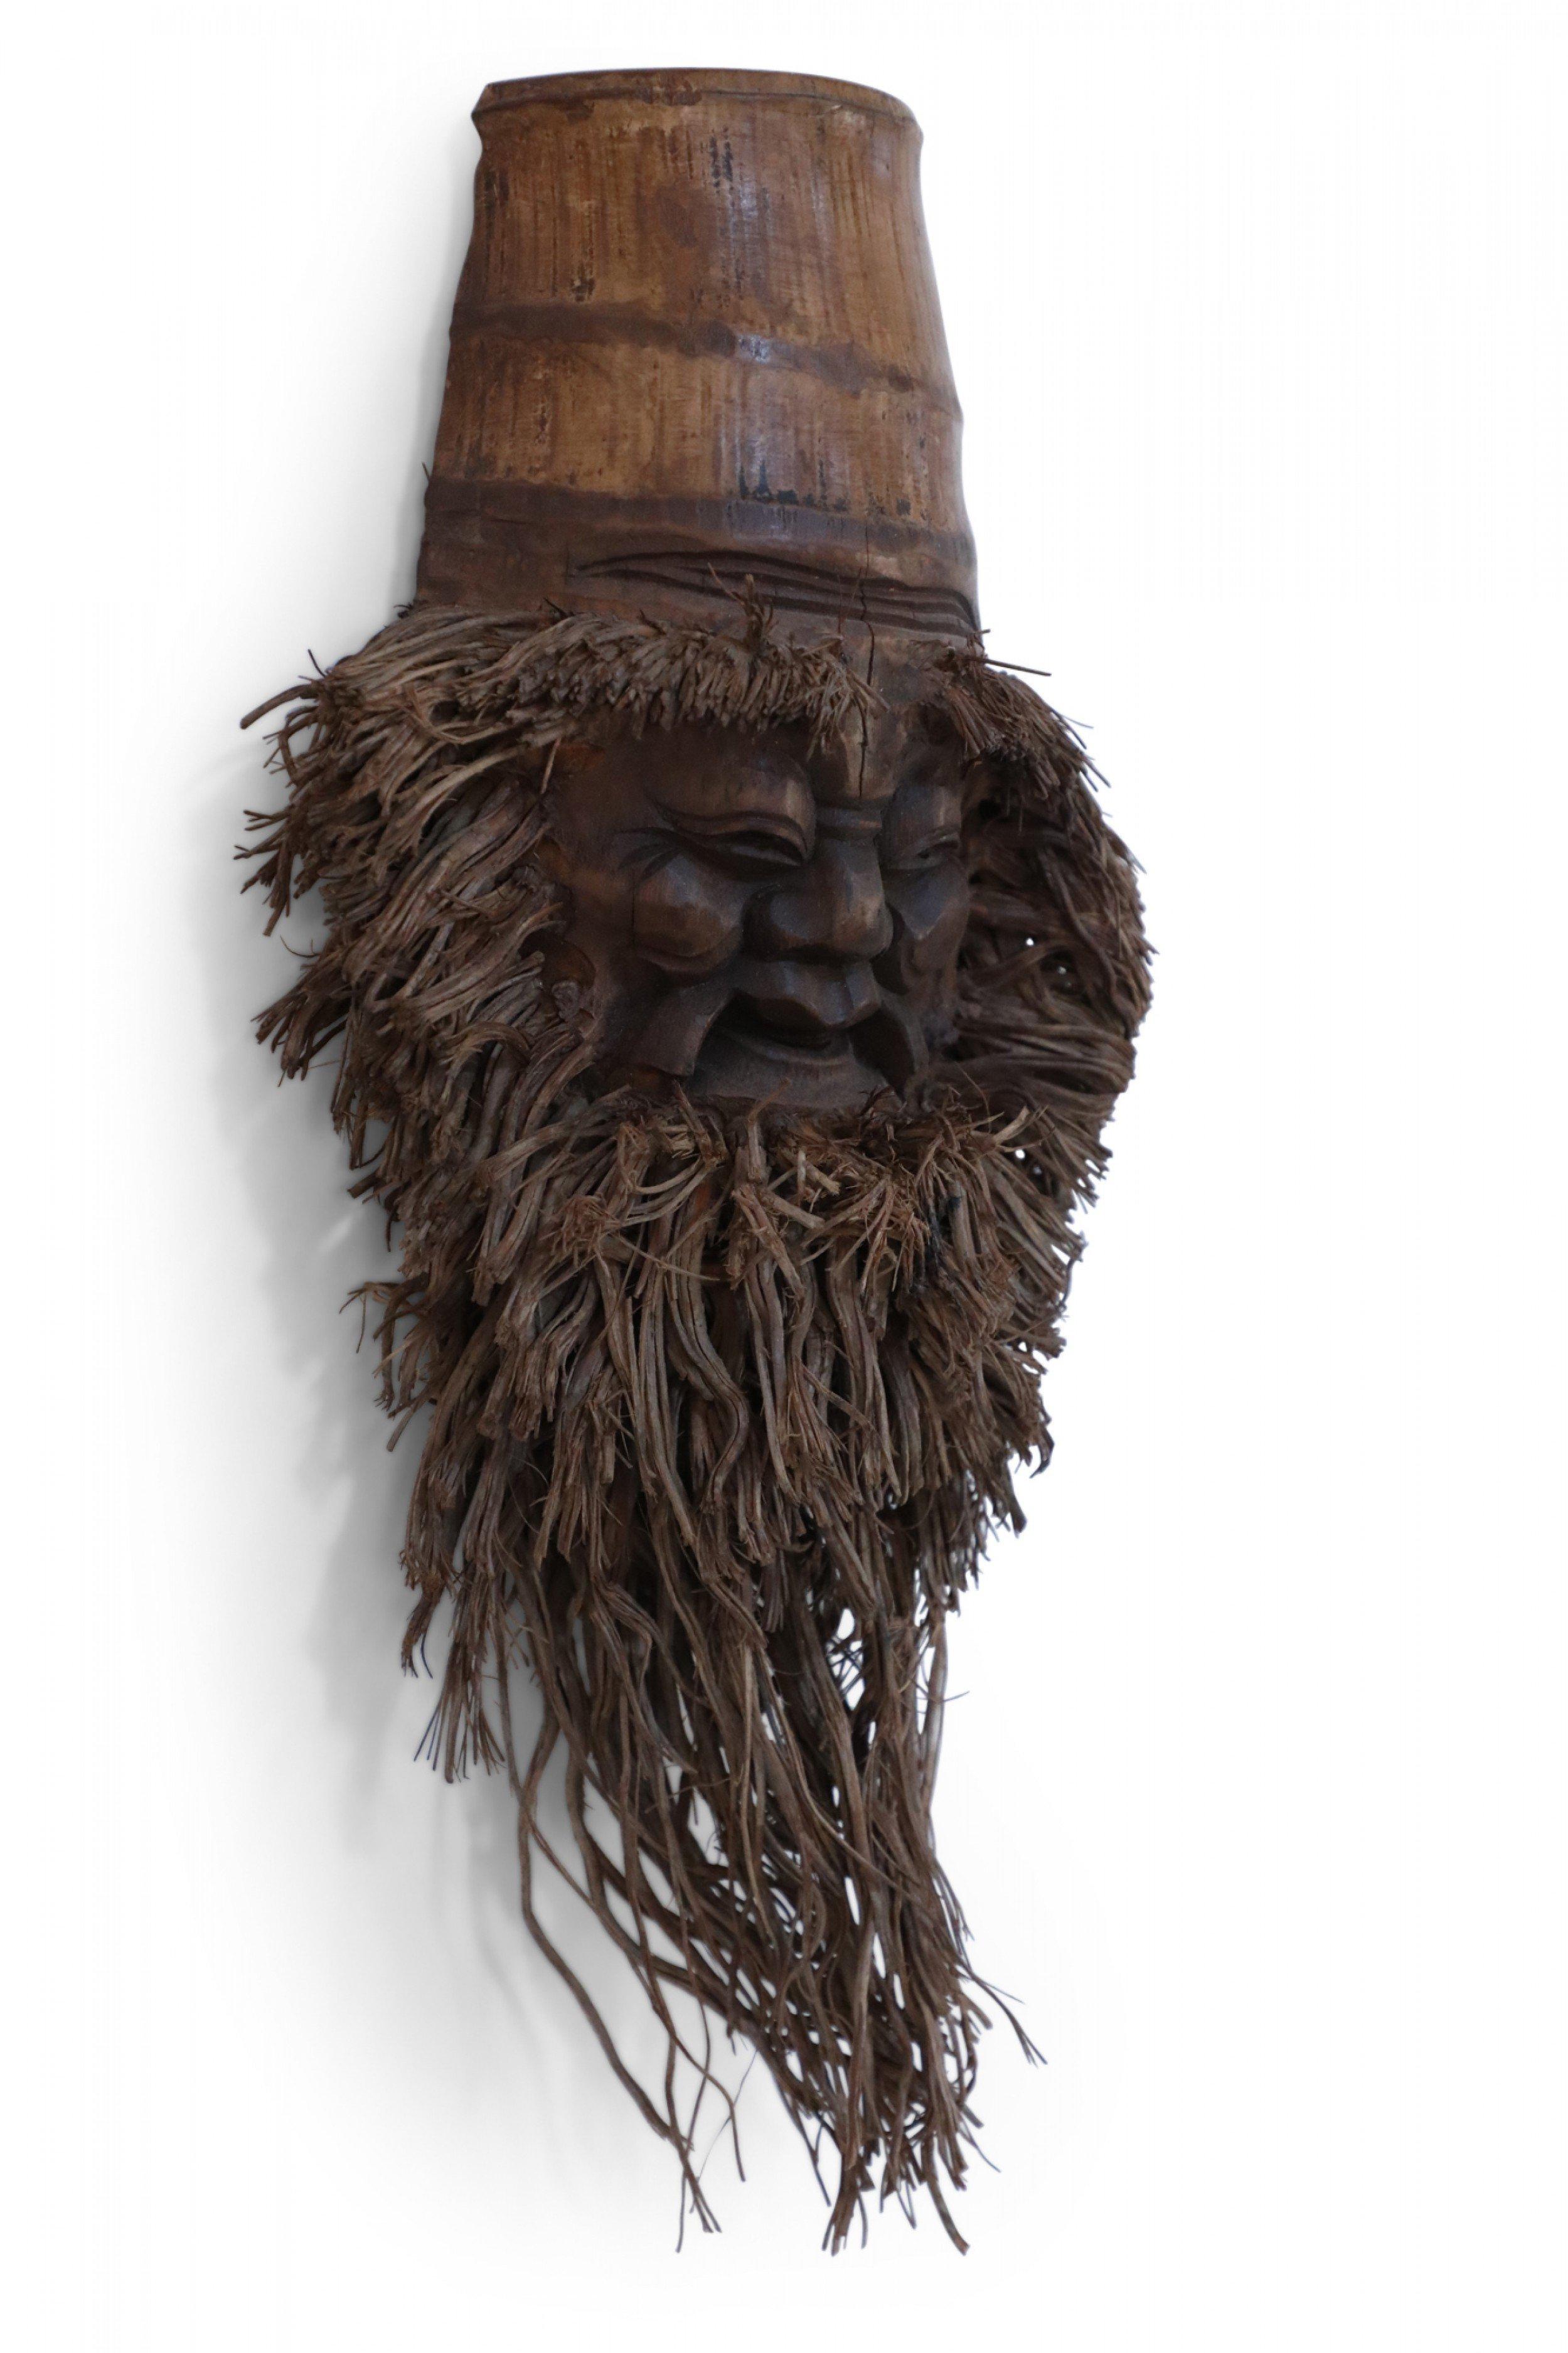 Chinese wall plaque made from a bamboo root carved in the shape of a smiling face with a bamboo root fiber beard. (Companion pieces: NWL2543A-G).
  